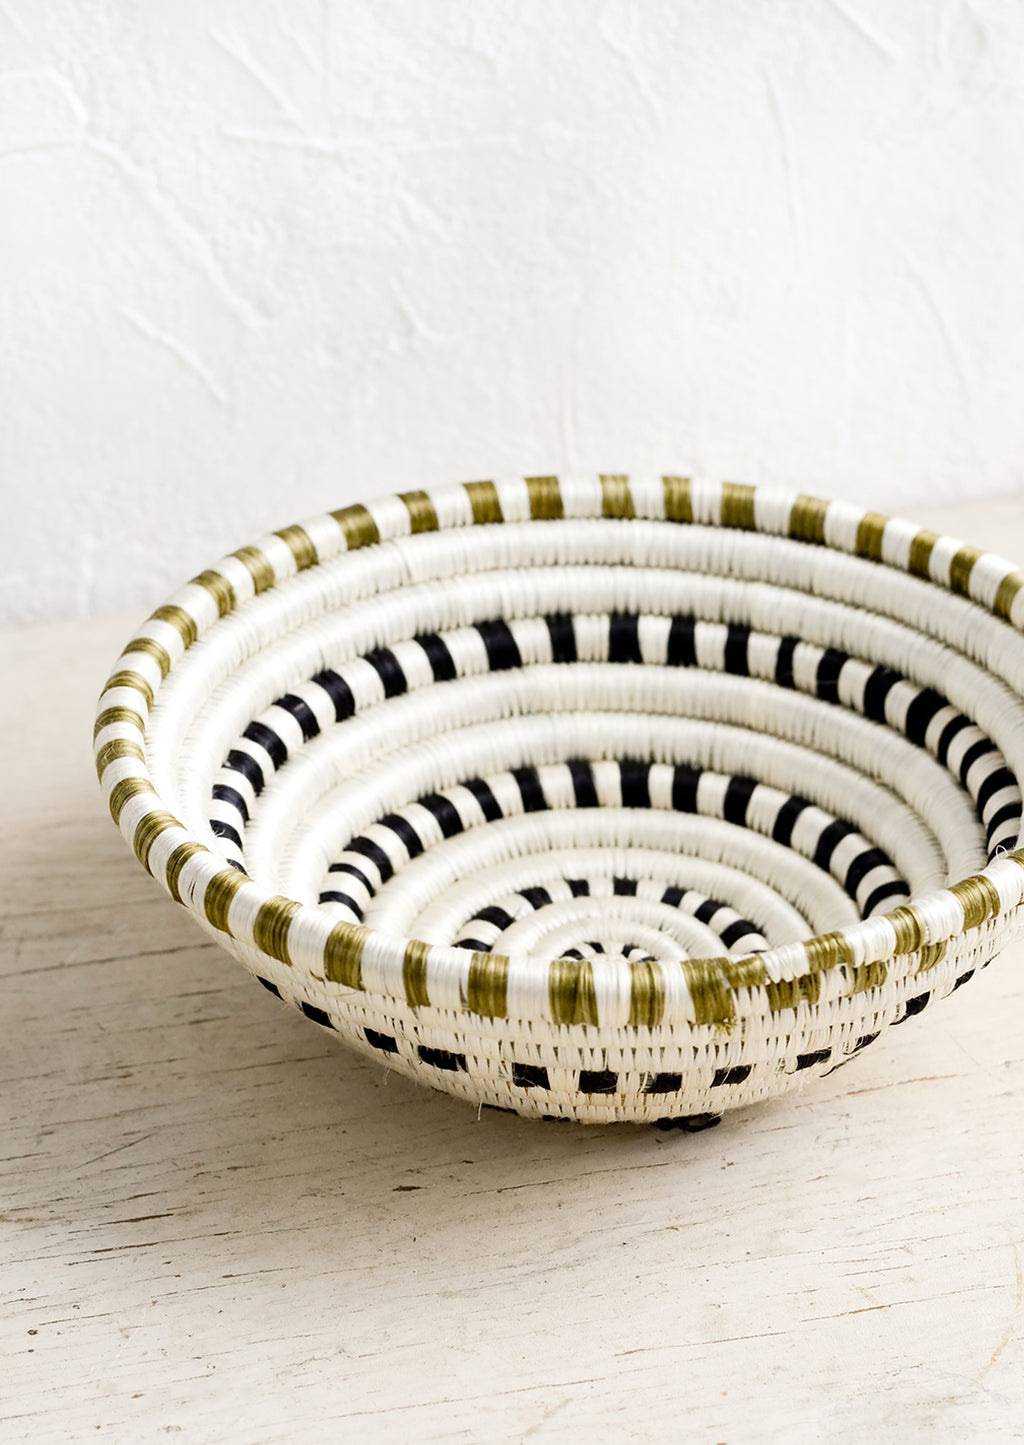 3: A sweetgrass basket in black and white dash pattern.